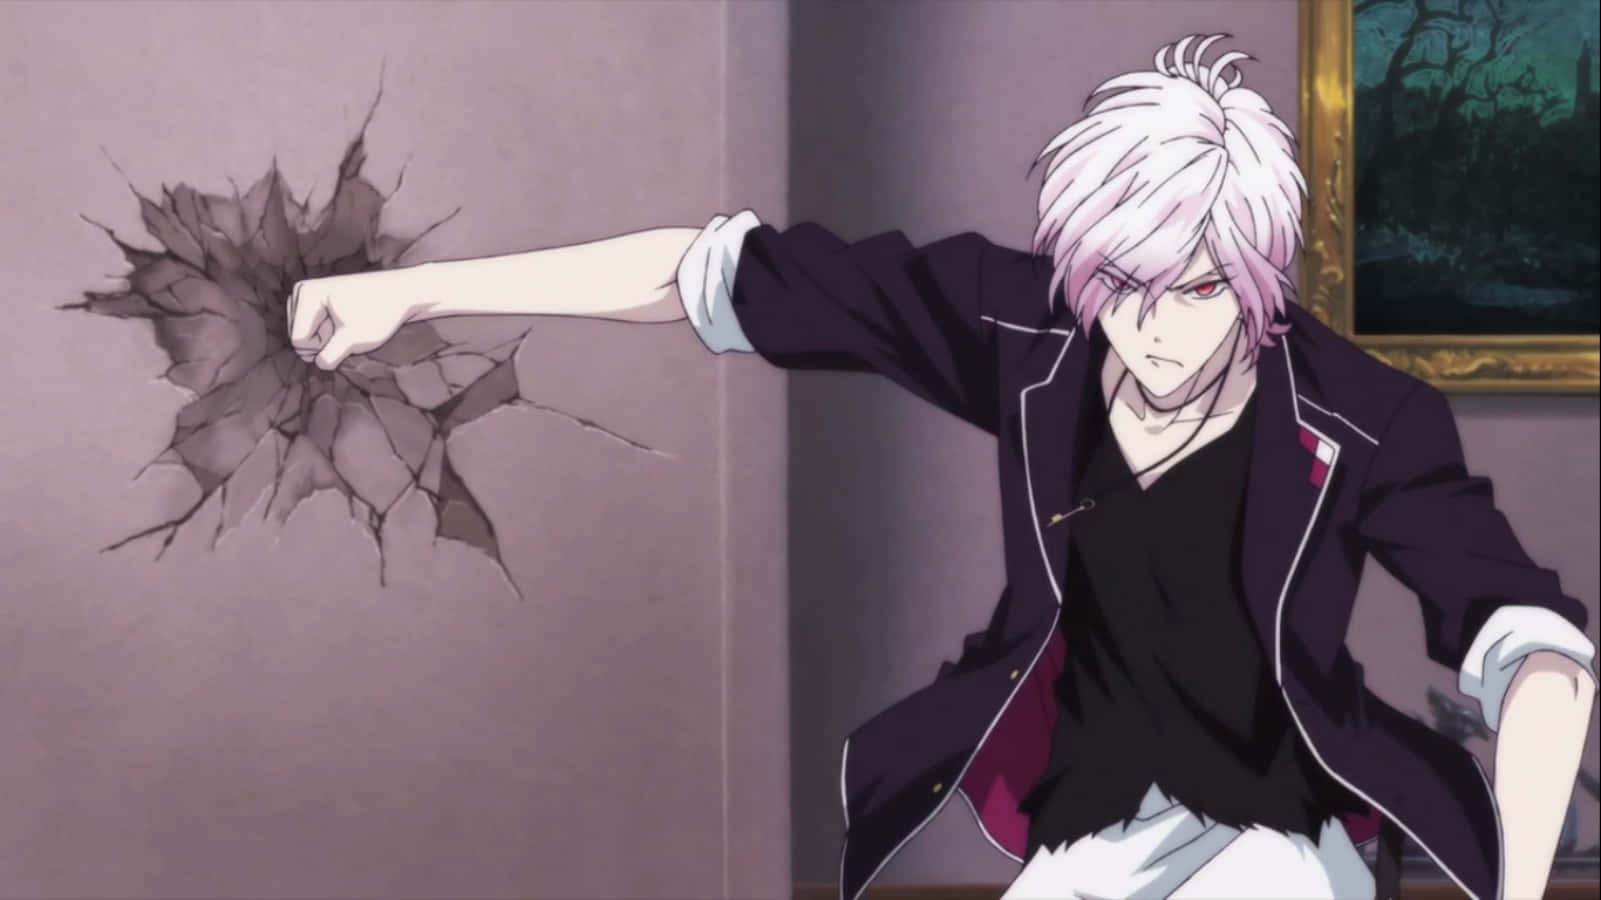 A Character With White Hair Is Holding A Broken Wall